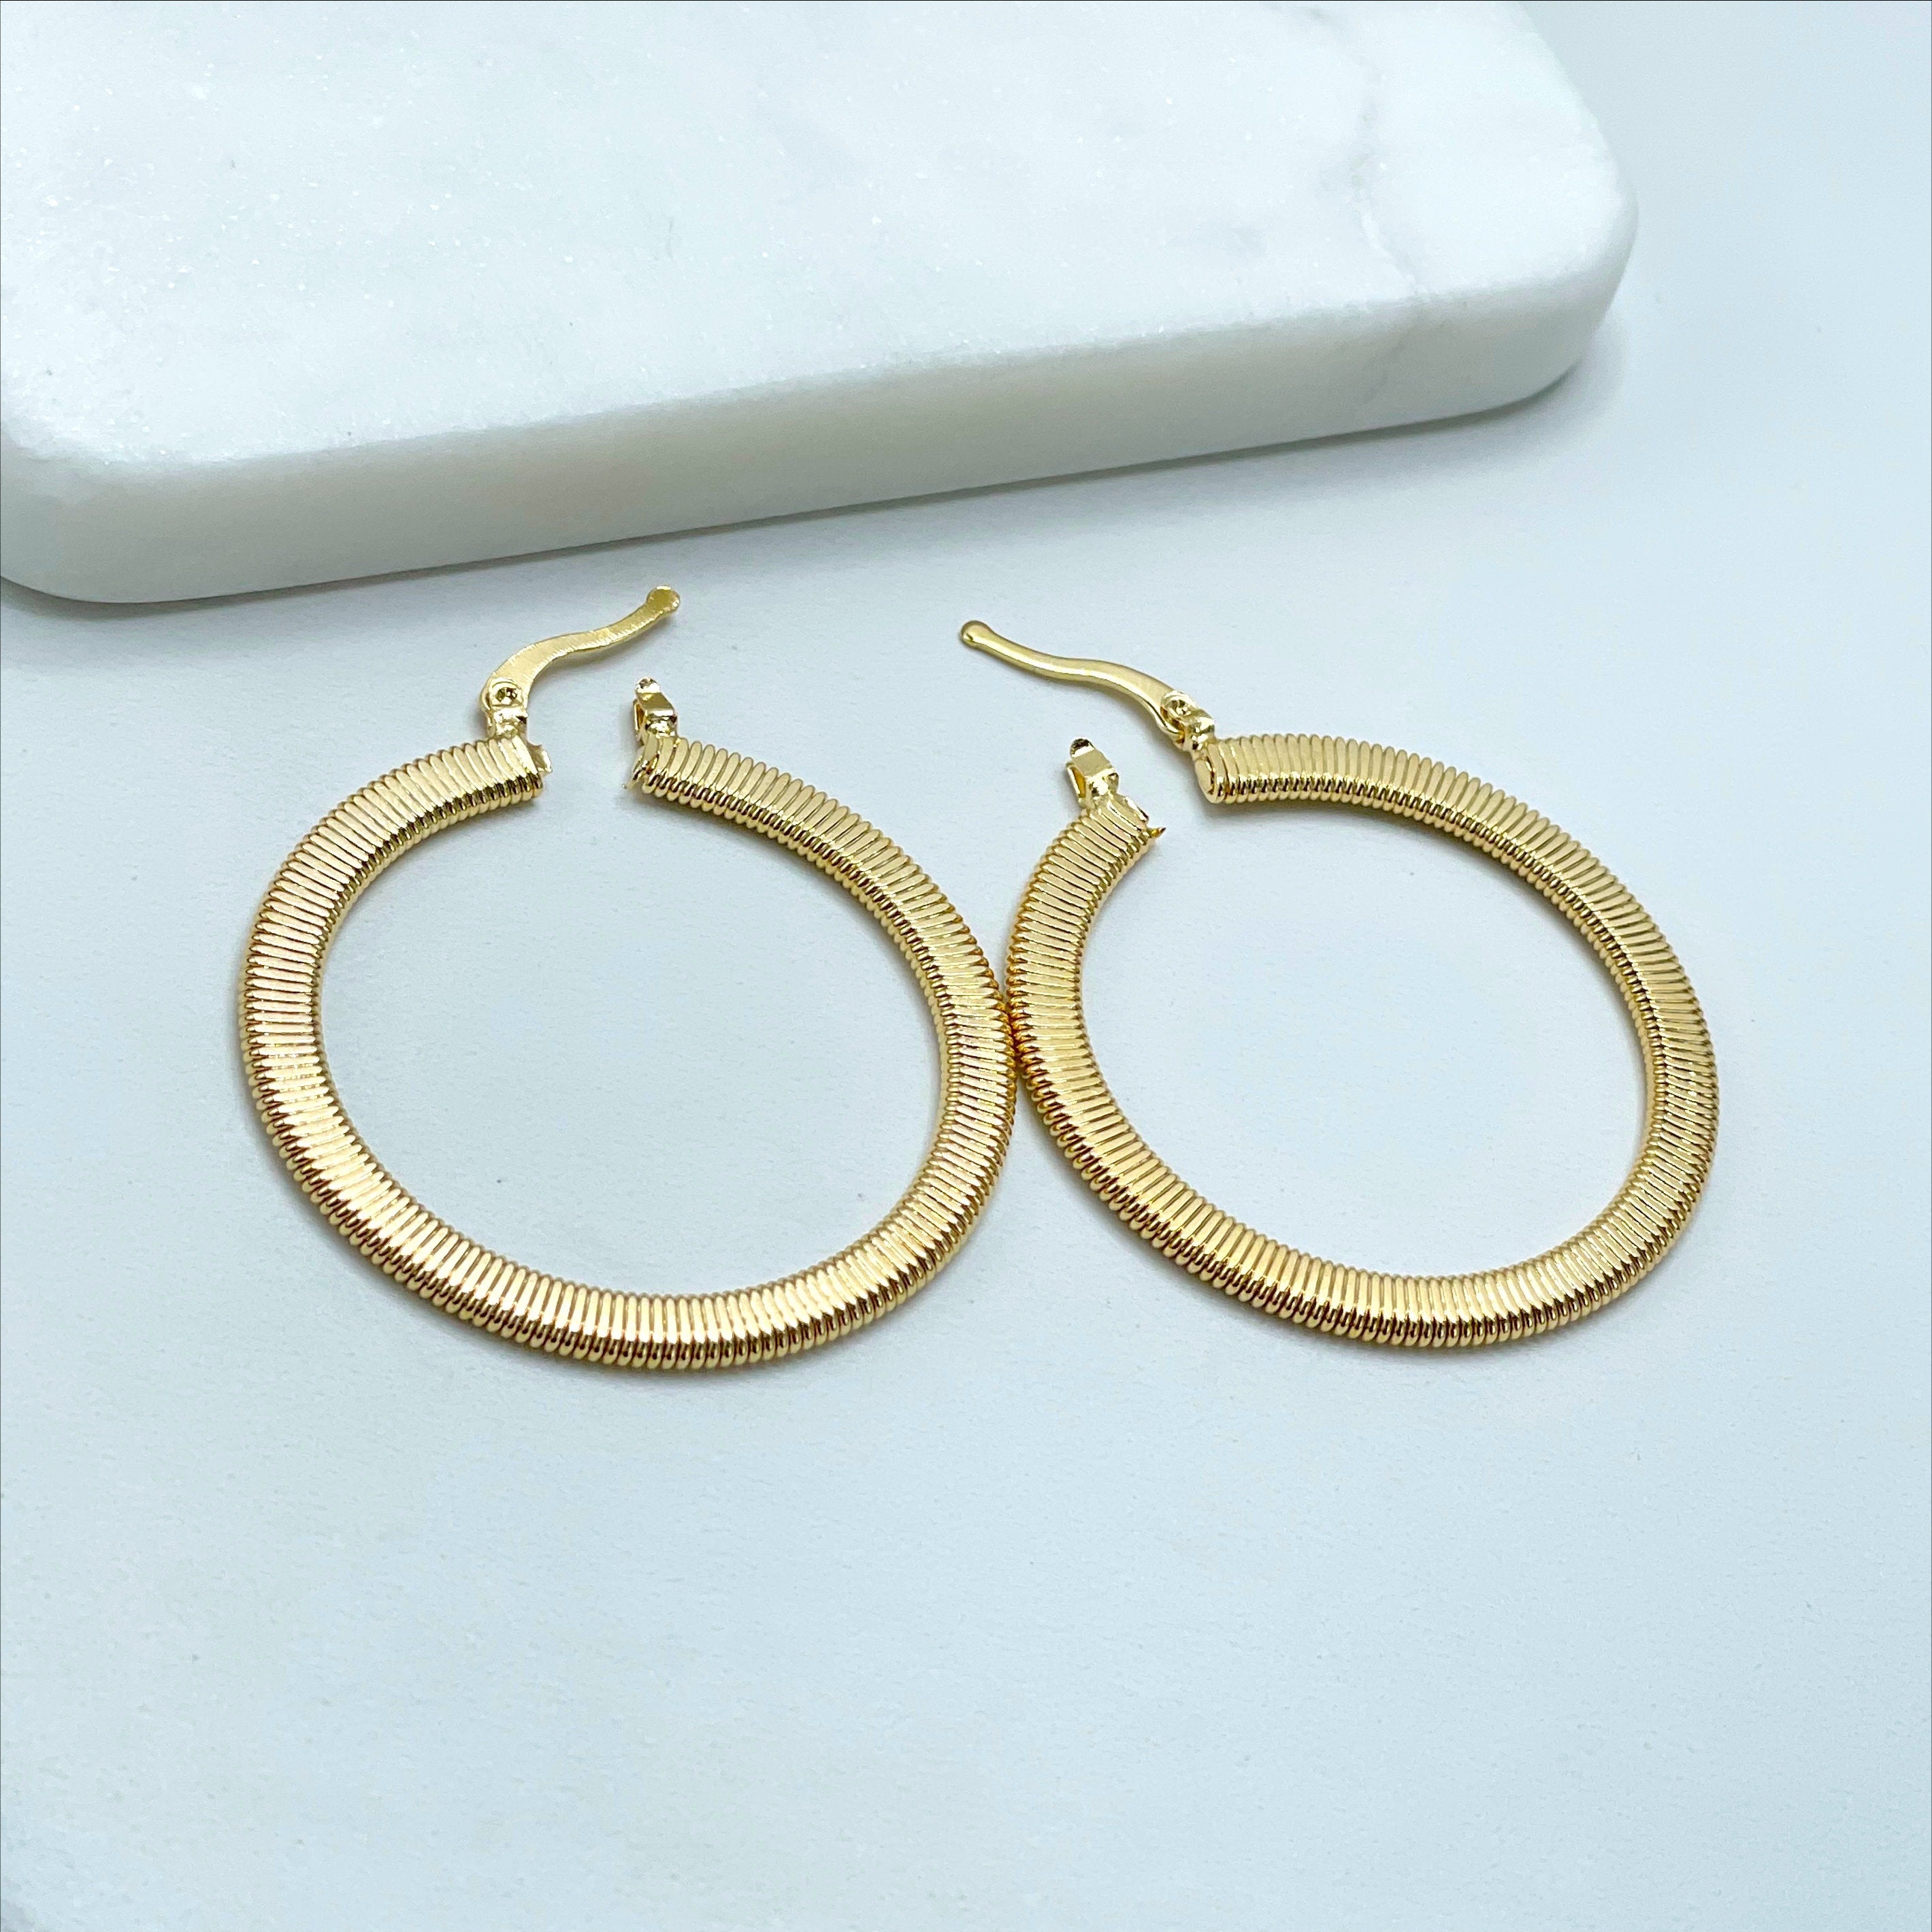 18K Gold Filled 45mm or 39mm Textured Hoops Earrings, Match Herringbone Design Wholesale Jewelry Making Supplies 39